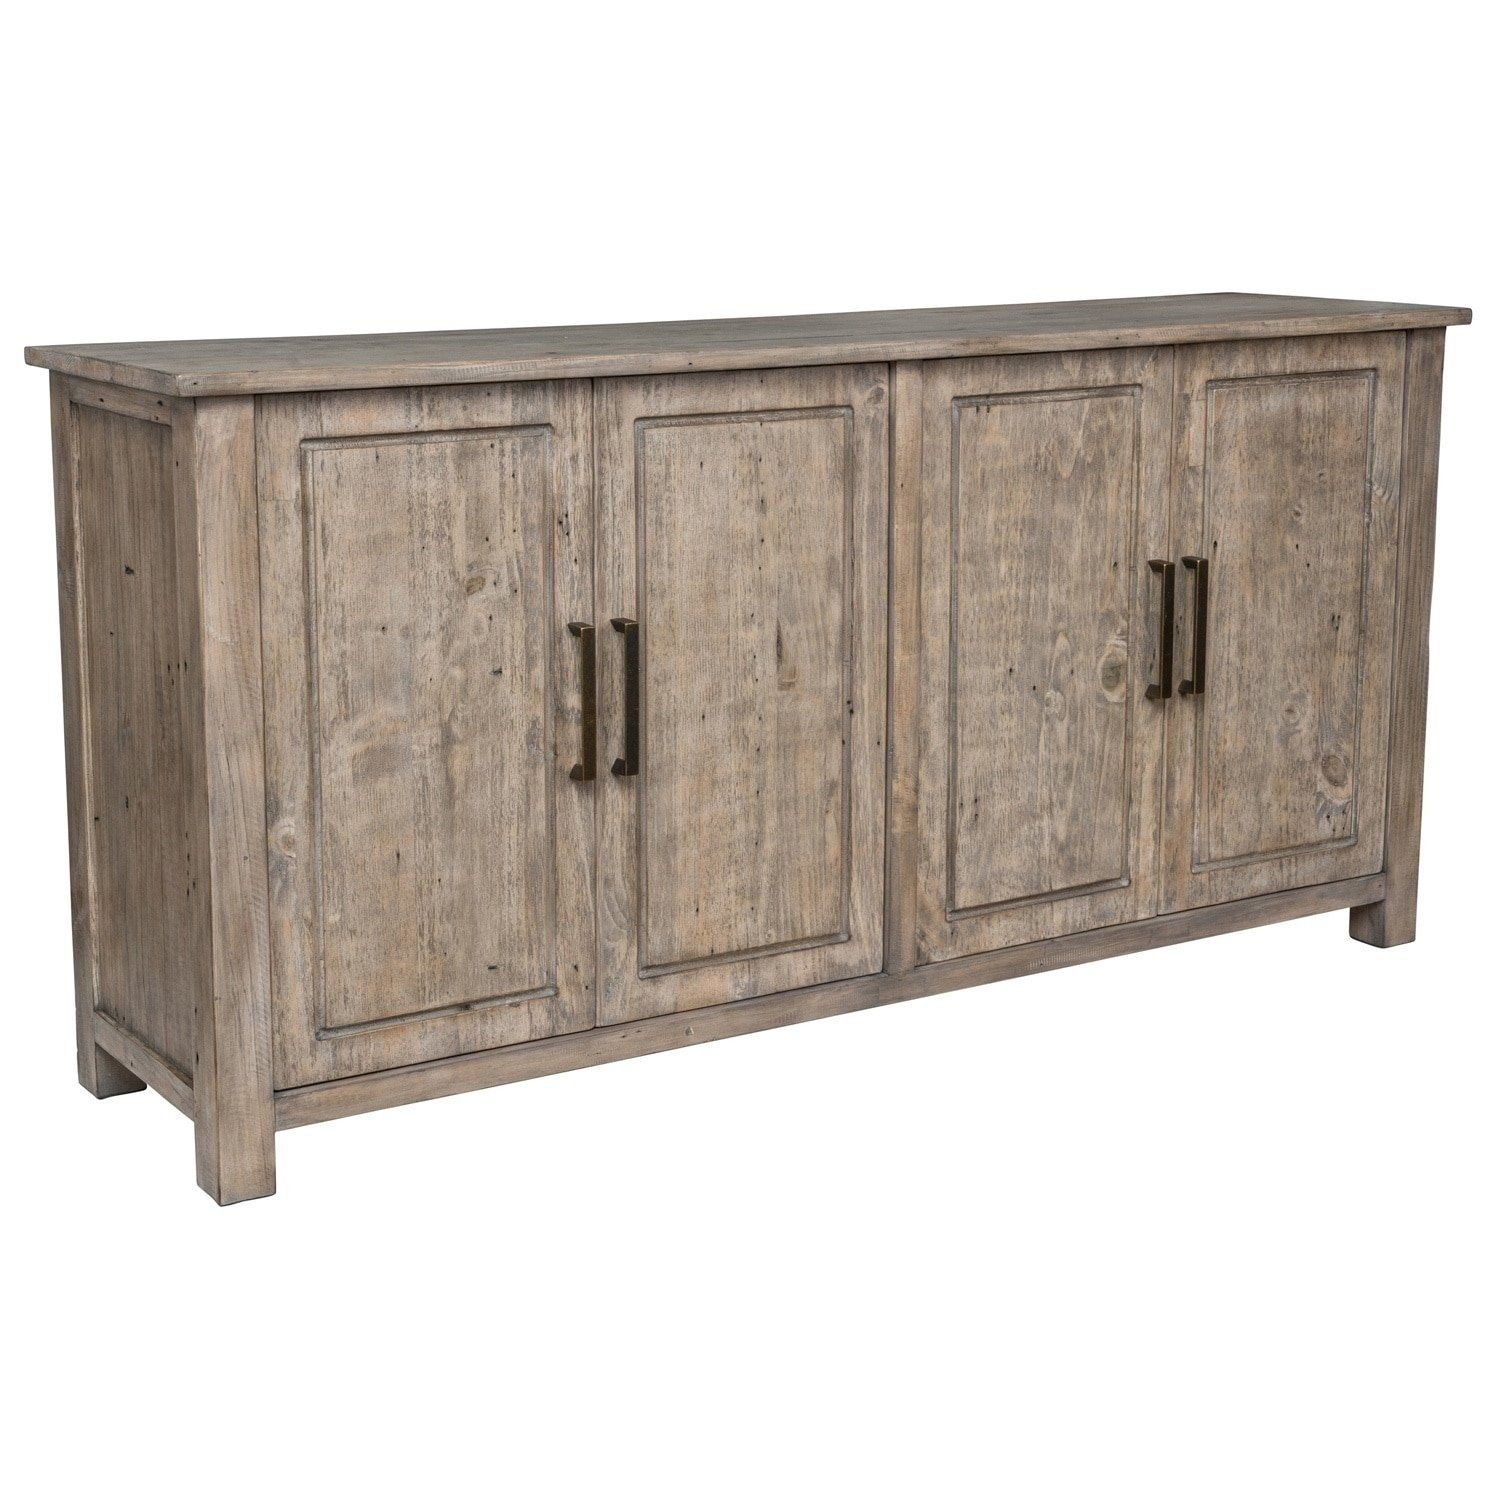 Shop Aires Reclaimed Wood 72 Inch Sideboardkosas Home – Free Regarding Most Current Brown Wood 72 Inch Sideboards (View 2 of 20)